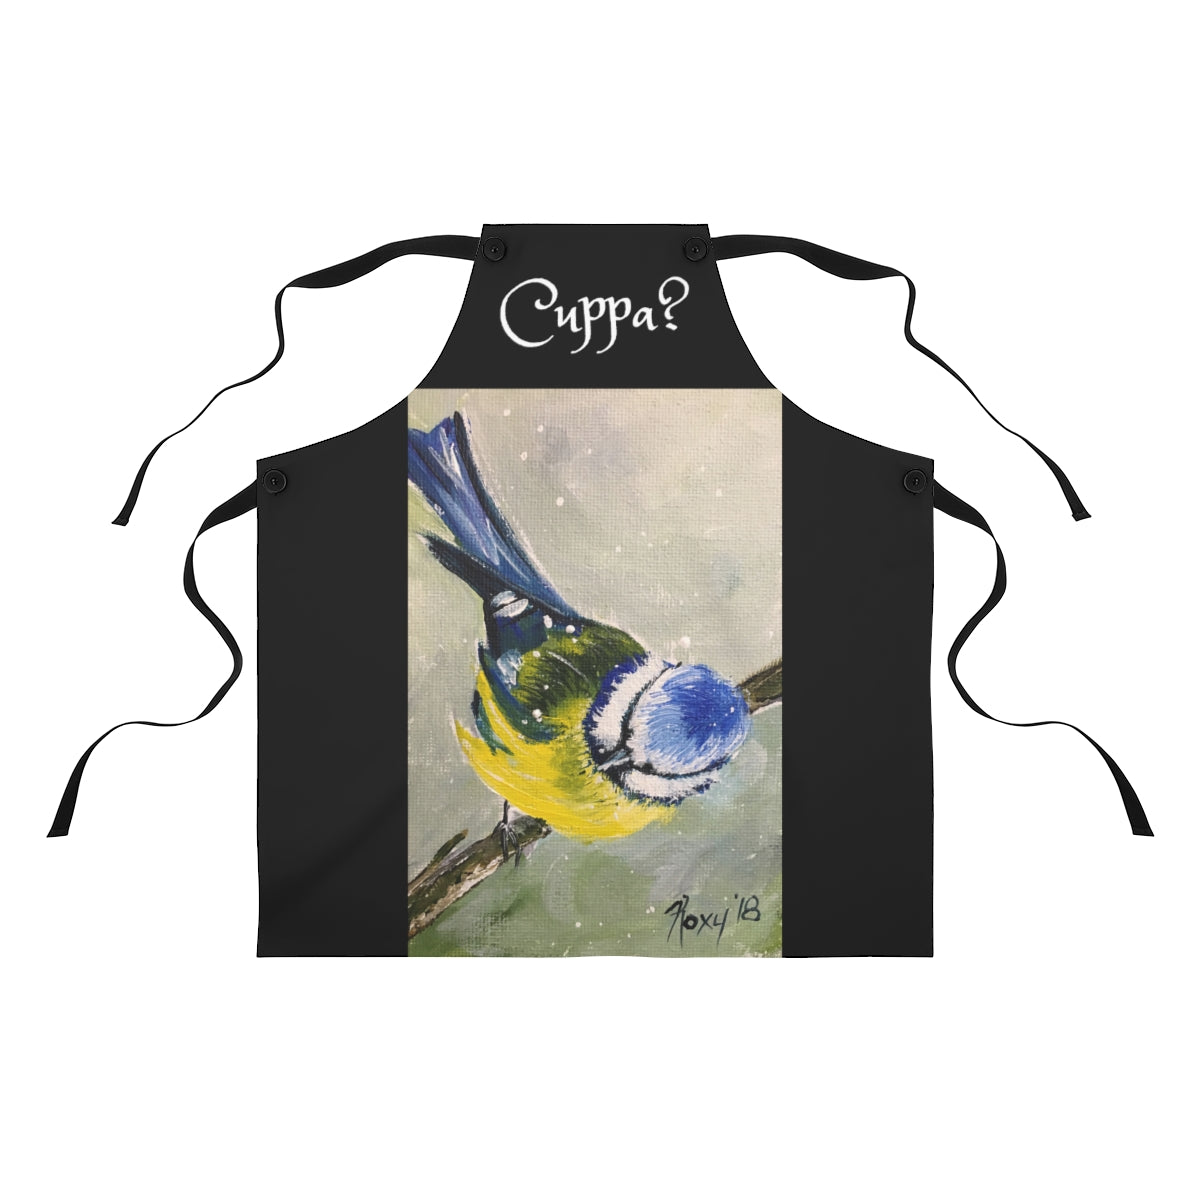 Cuppa? English UK phrase saying on a Black Kitchen Apron  with   Blue Tit  in the Snow